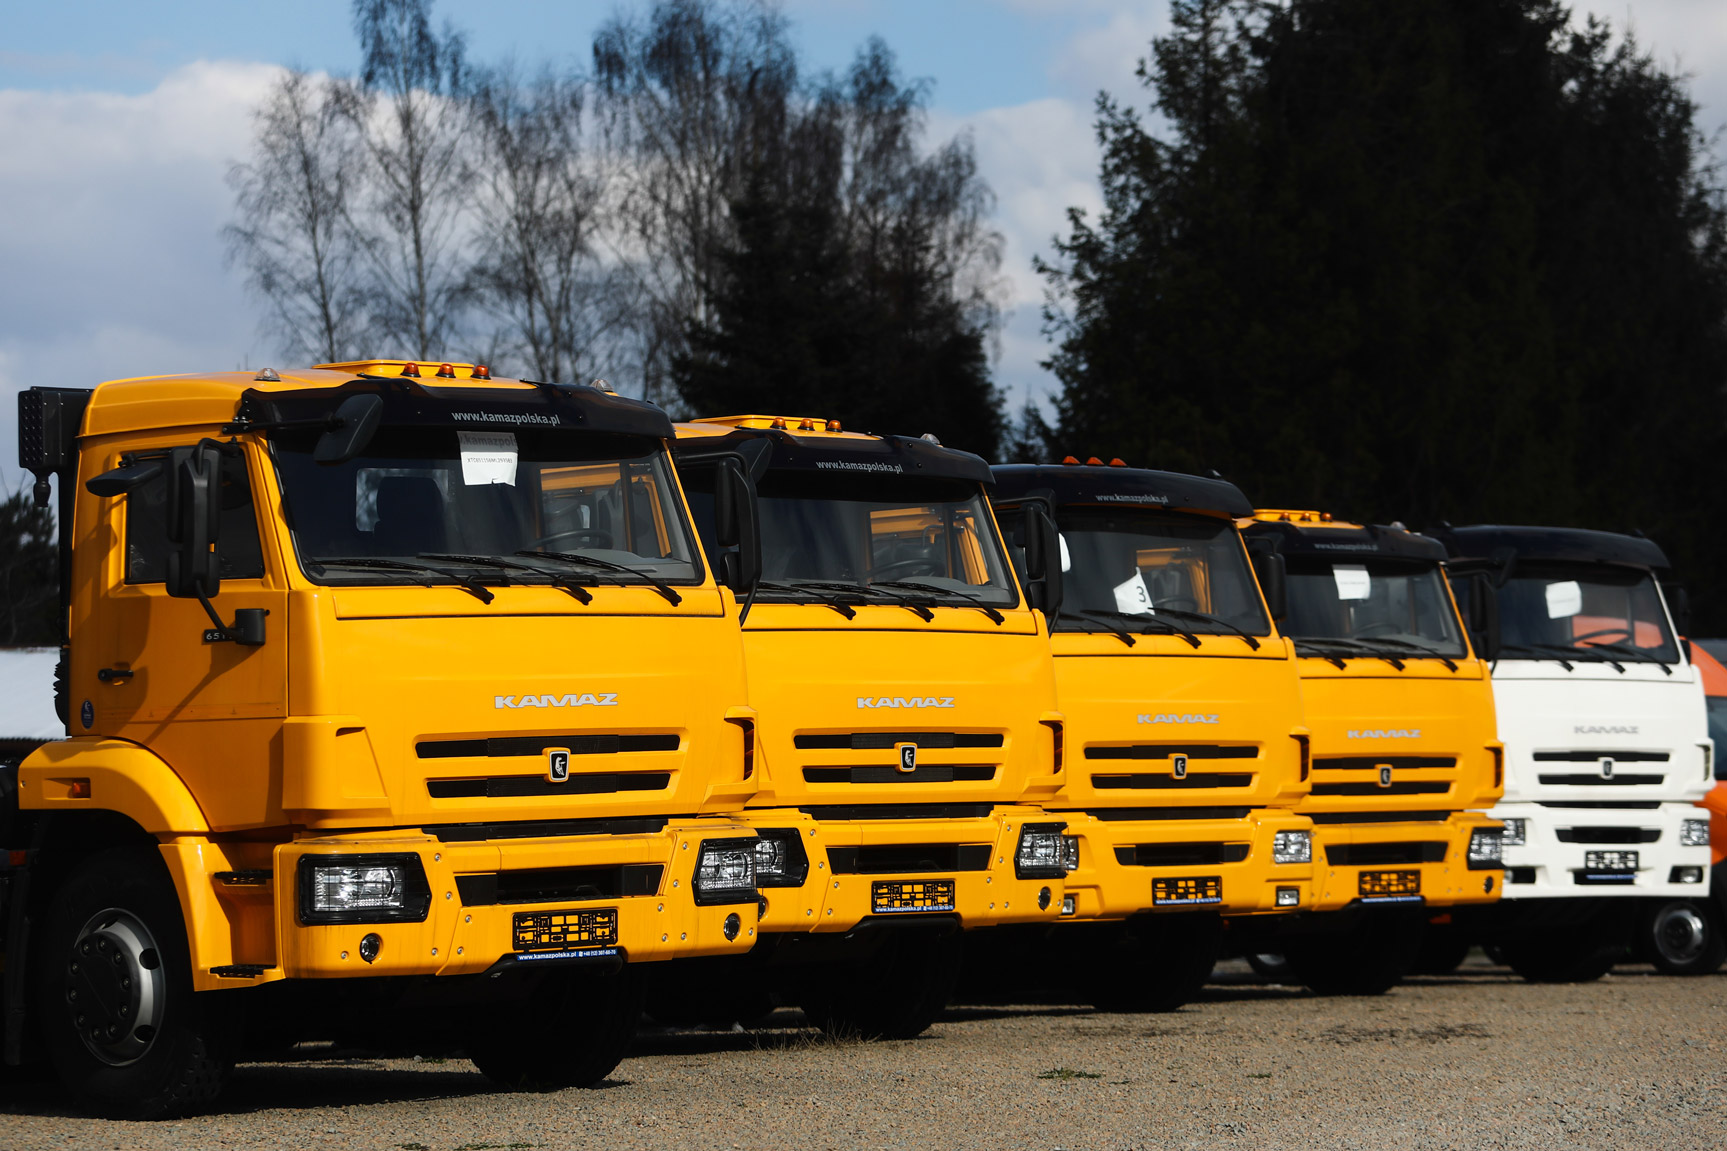 A line of Kamaz trucks stand outside a showroom in Libertow, Poland on April 4.